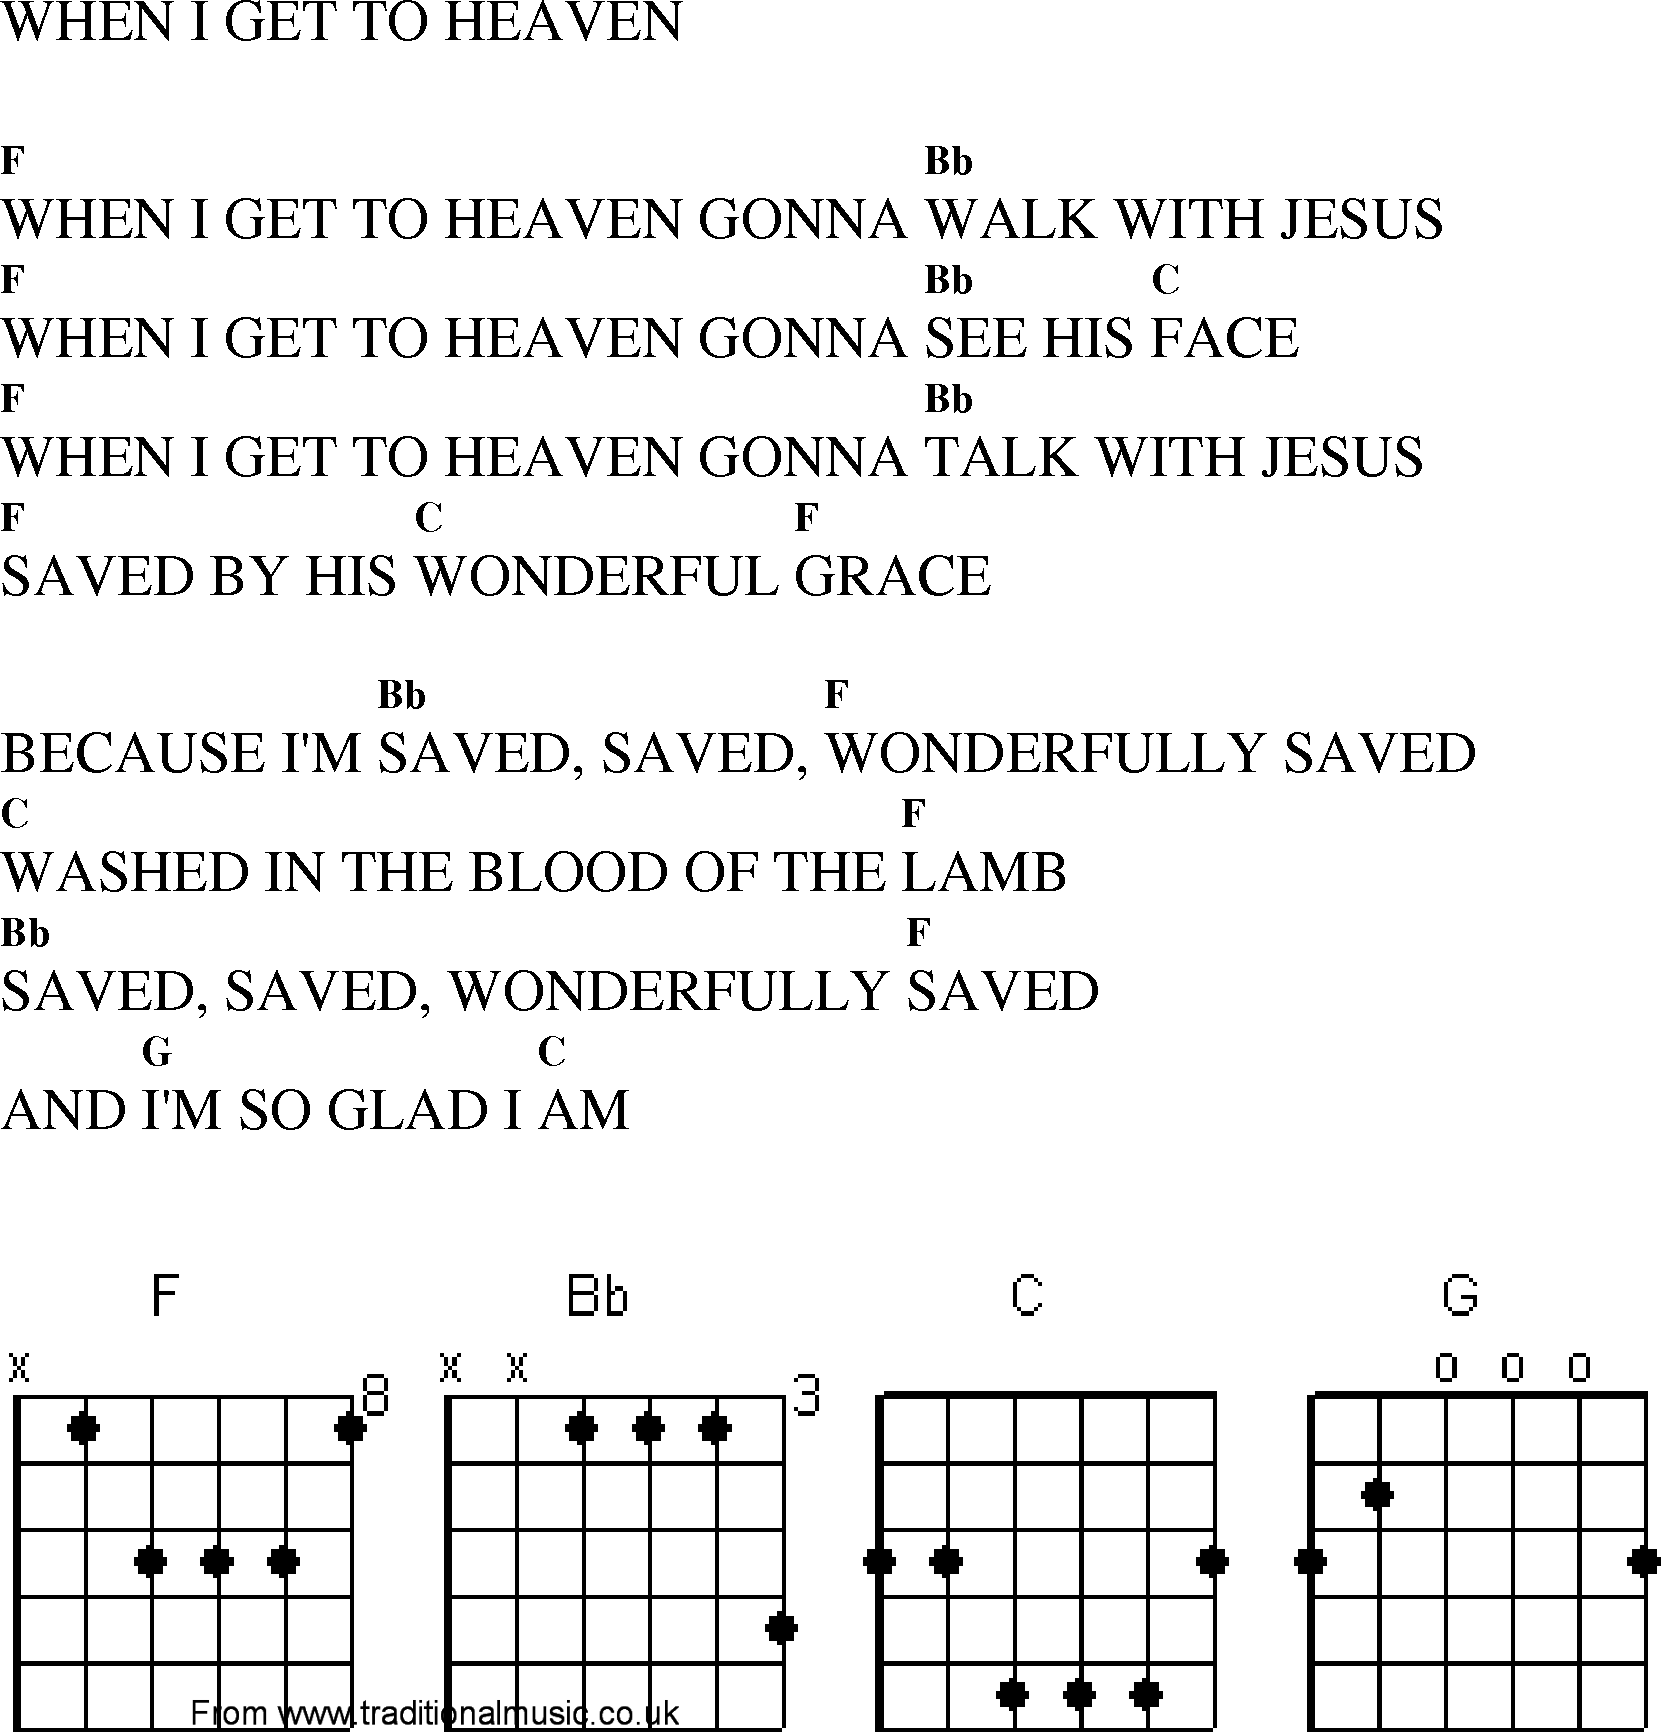 Gospel Song: when_i_get_to_heaven, lyrics and chords.